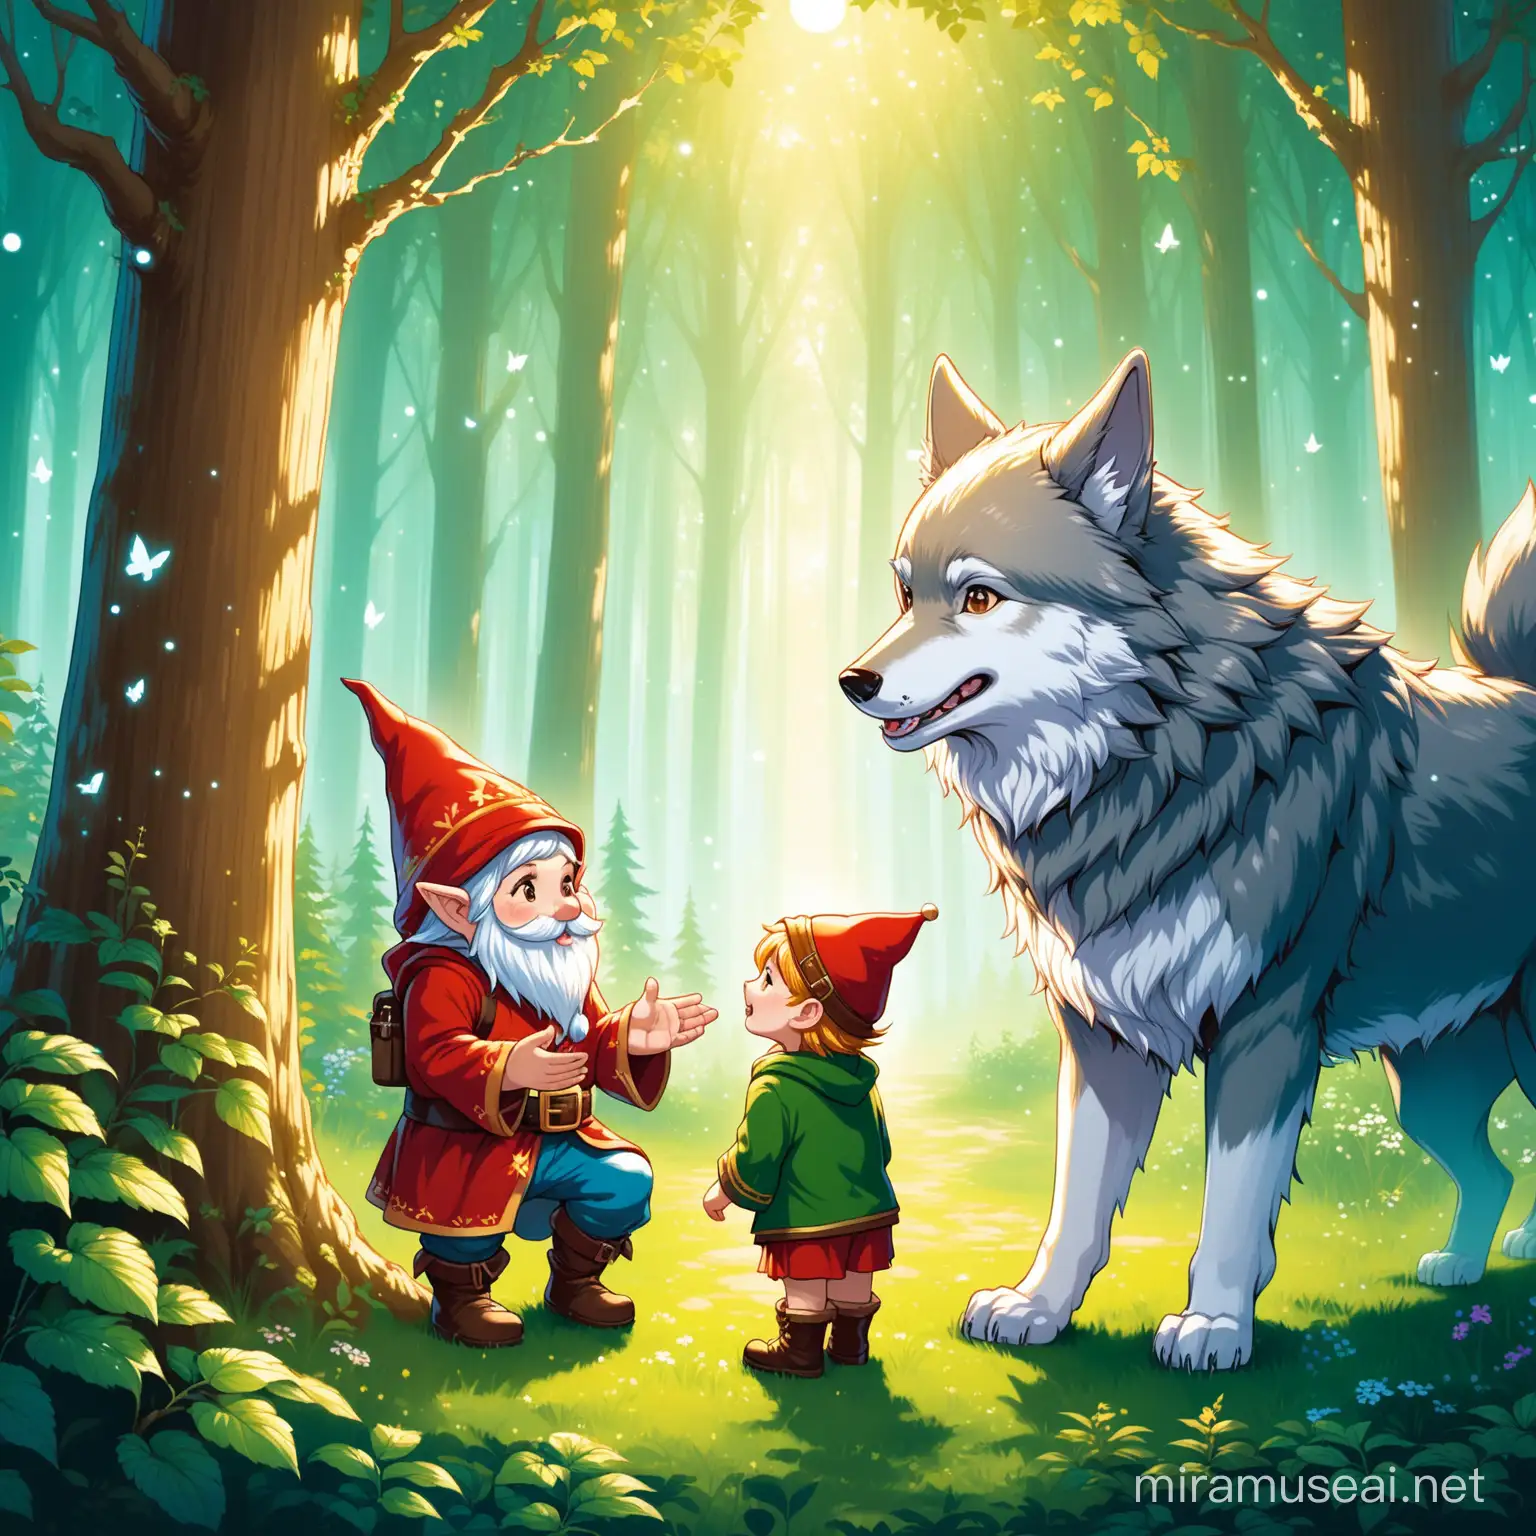 Enchanted Forest Encounter Gnome and Wolf Dialogue